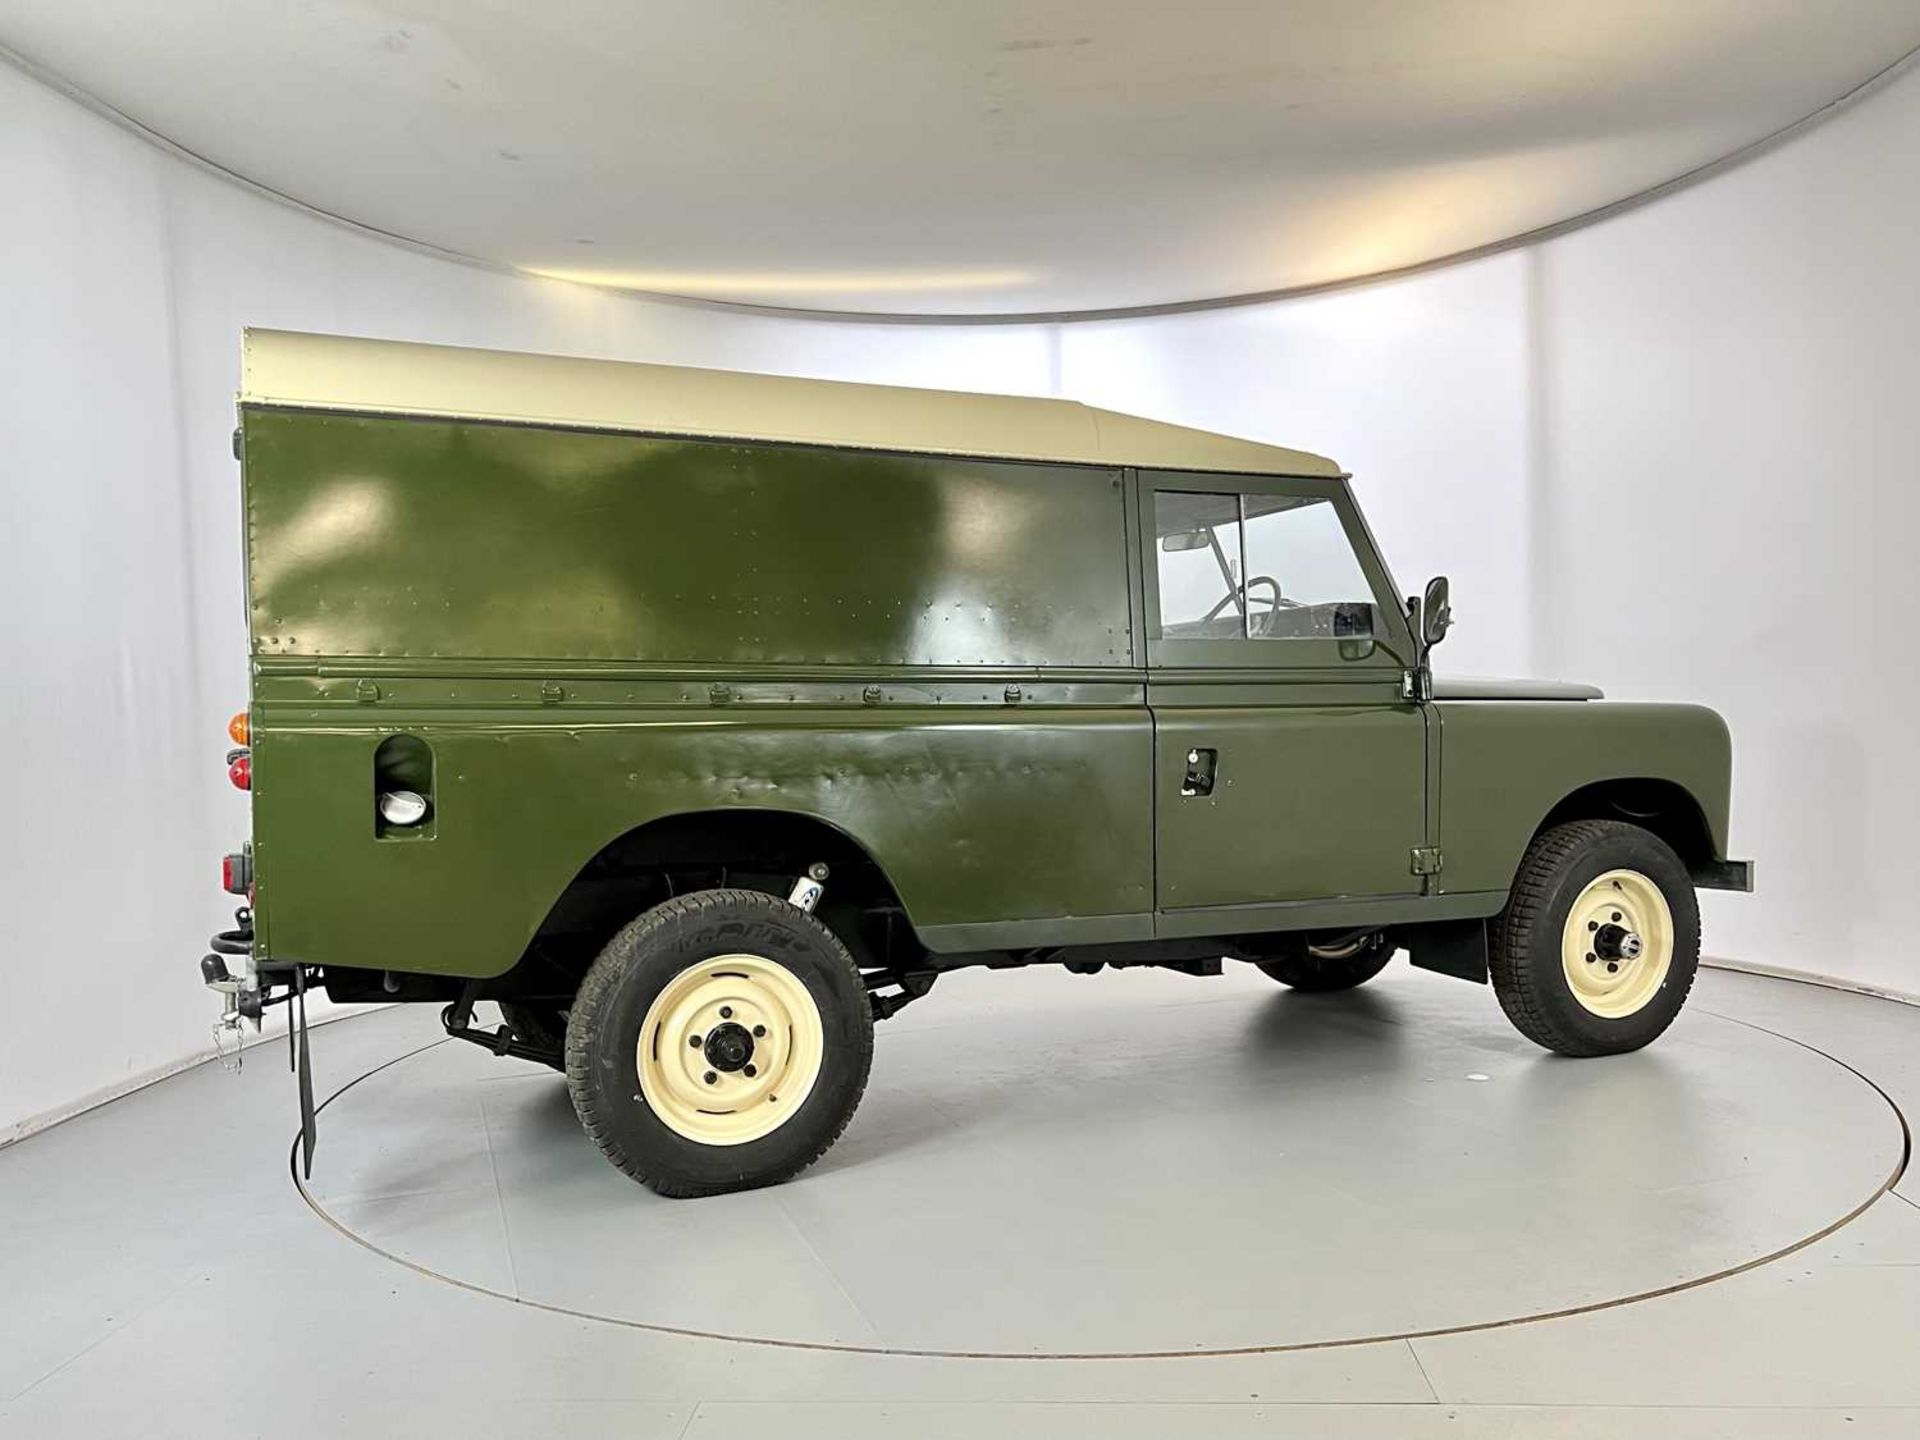 1981 Land Rover Series 3 - 6 Cylinder - Image 10 of 31